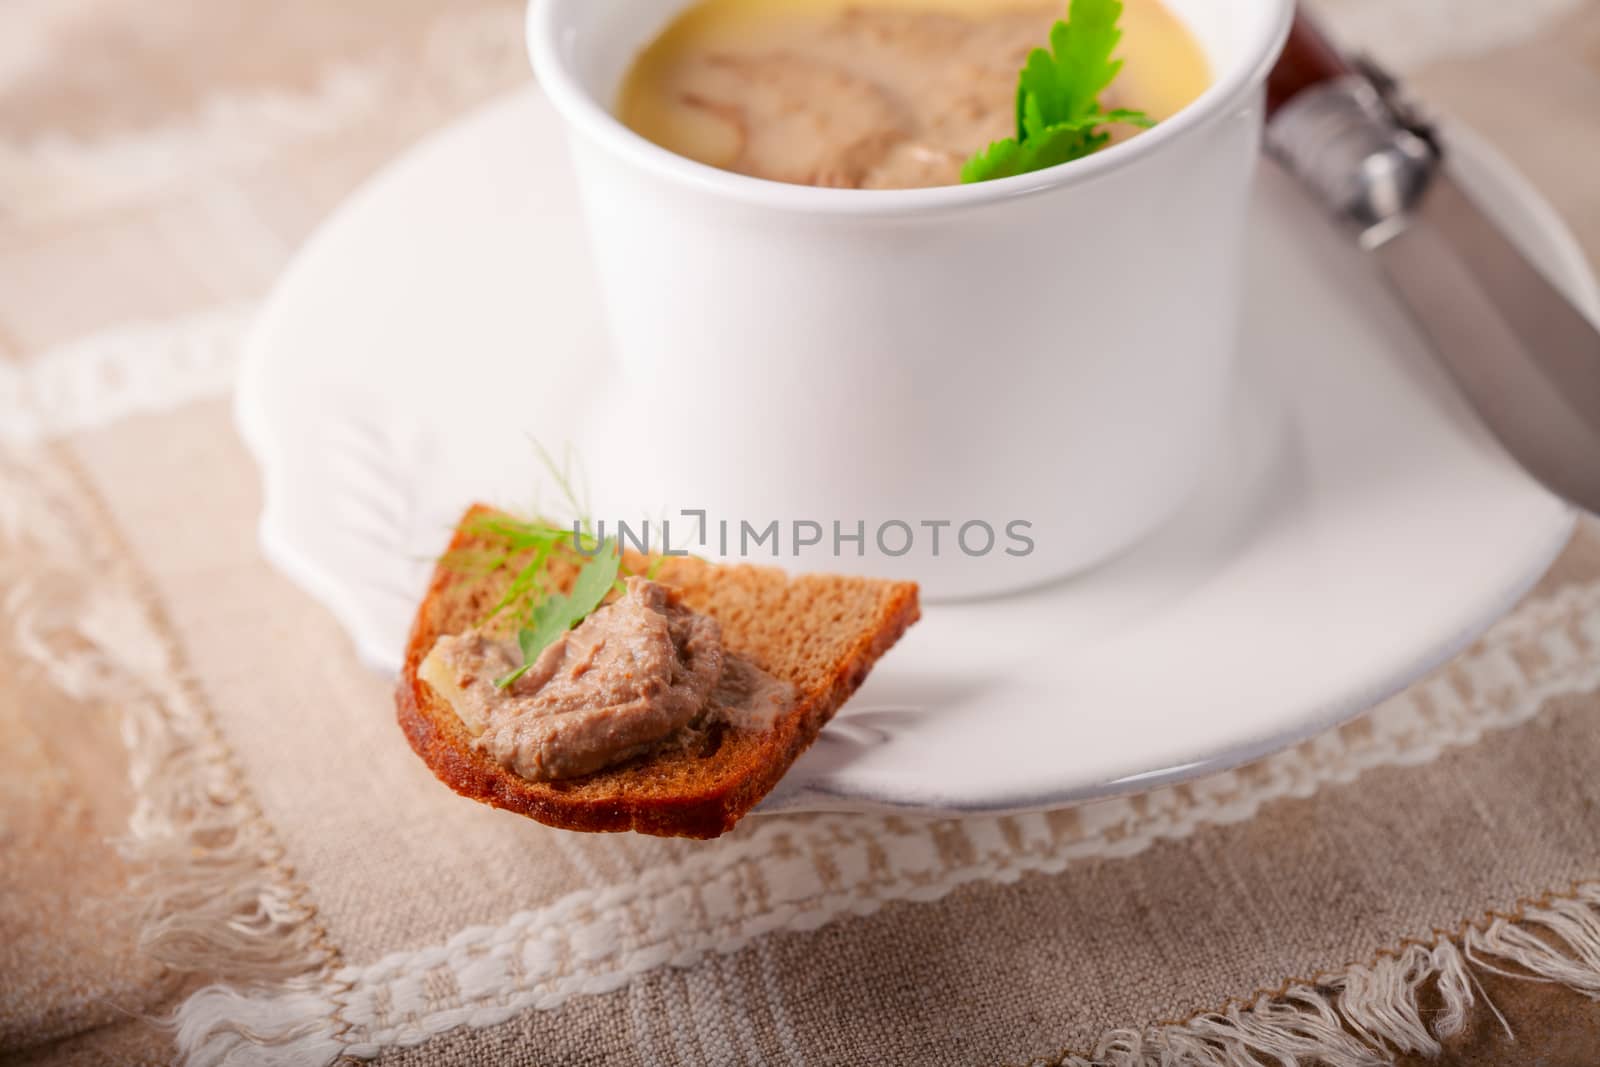 Home made chicken liver pate by supercat67